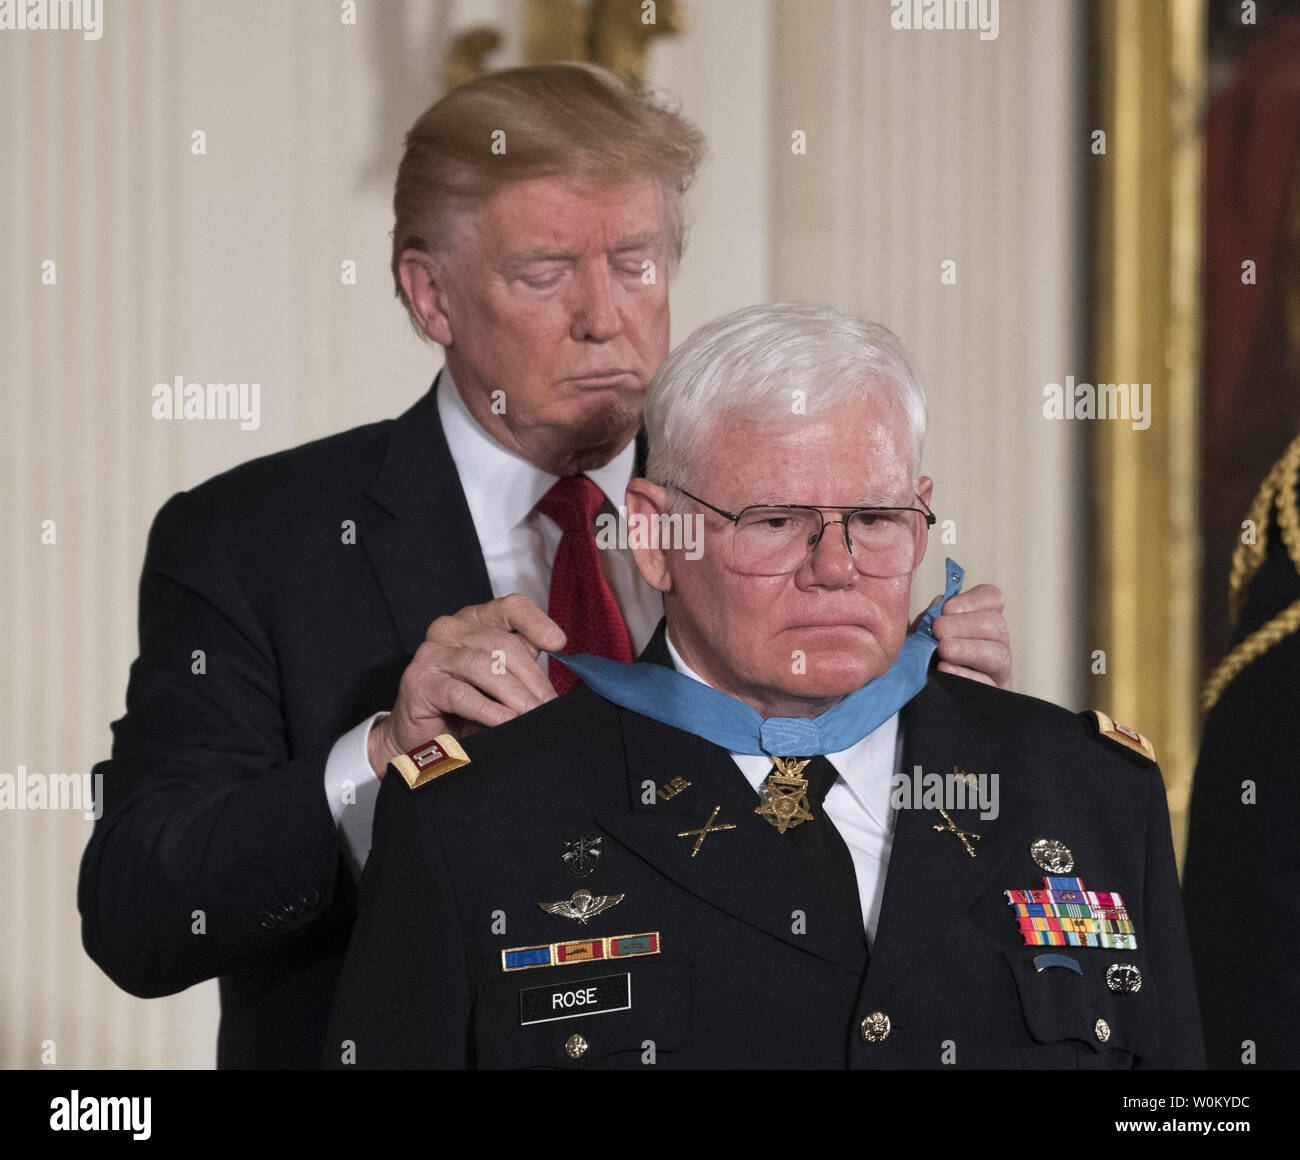 U.S. President Donald Trump presents the Medal of Honor to Retired Army Capt. Gary Michael Rose during ceremony in the East Room of the White House in Washington, DC on October 23, 2017.   Rose was a special forces medic who saved numerous lives on a secret mission to Laos during the Vietnam War.     Photo by Pat Benic/UPI Stock Photo